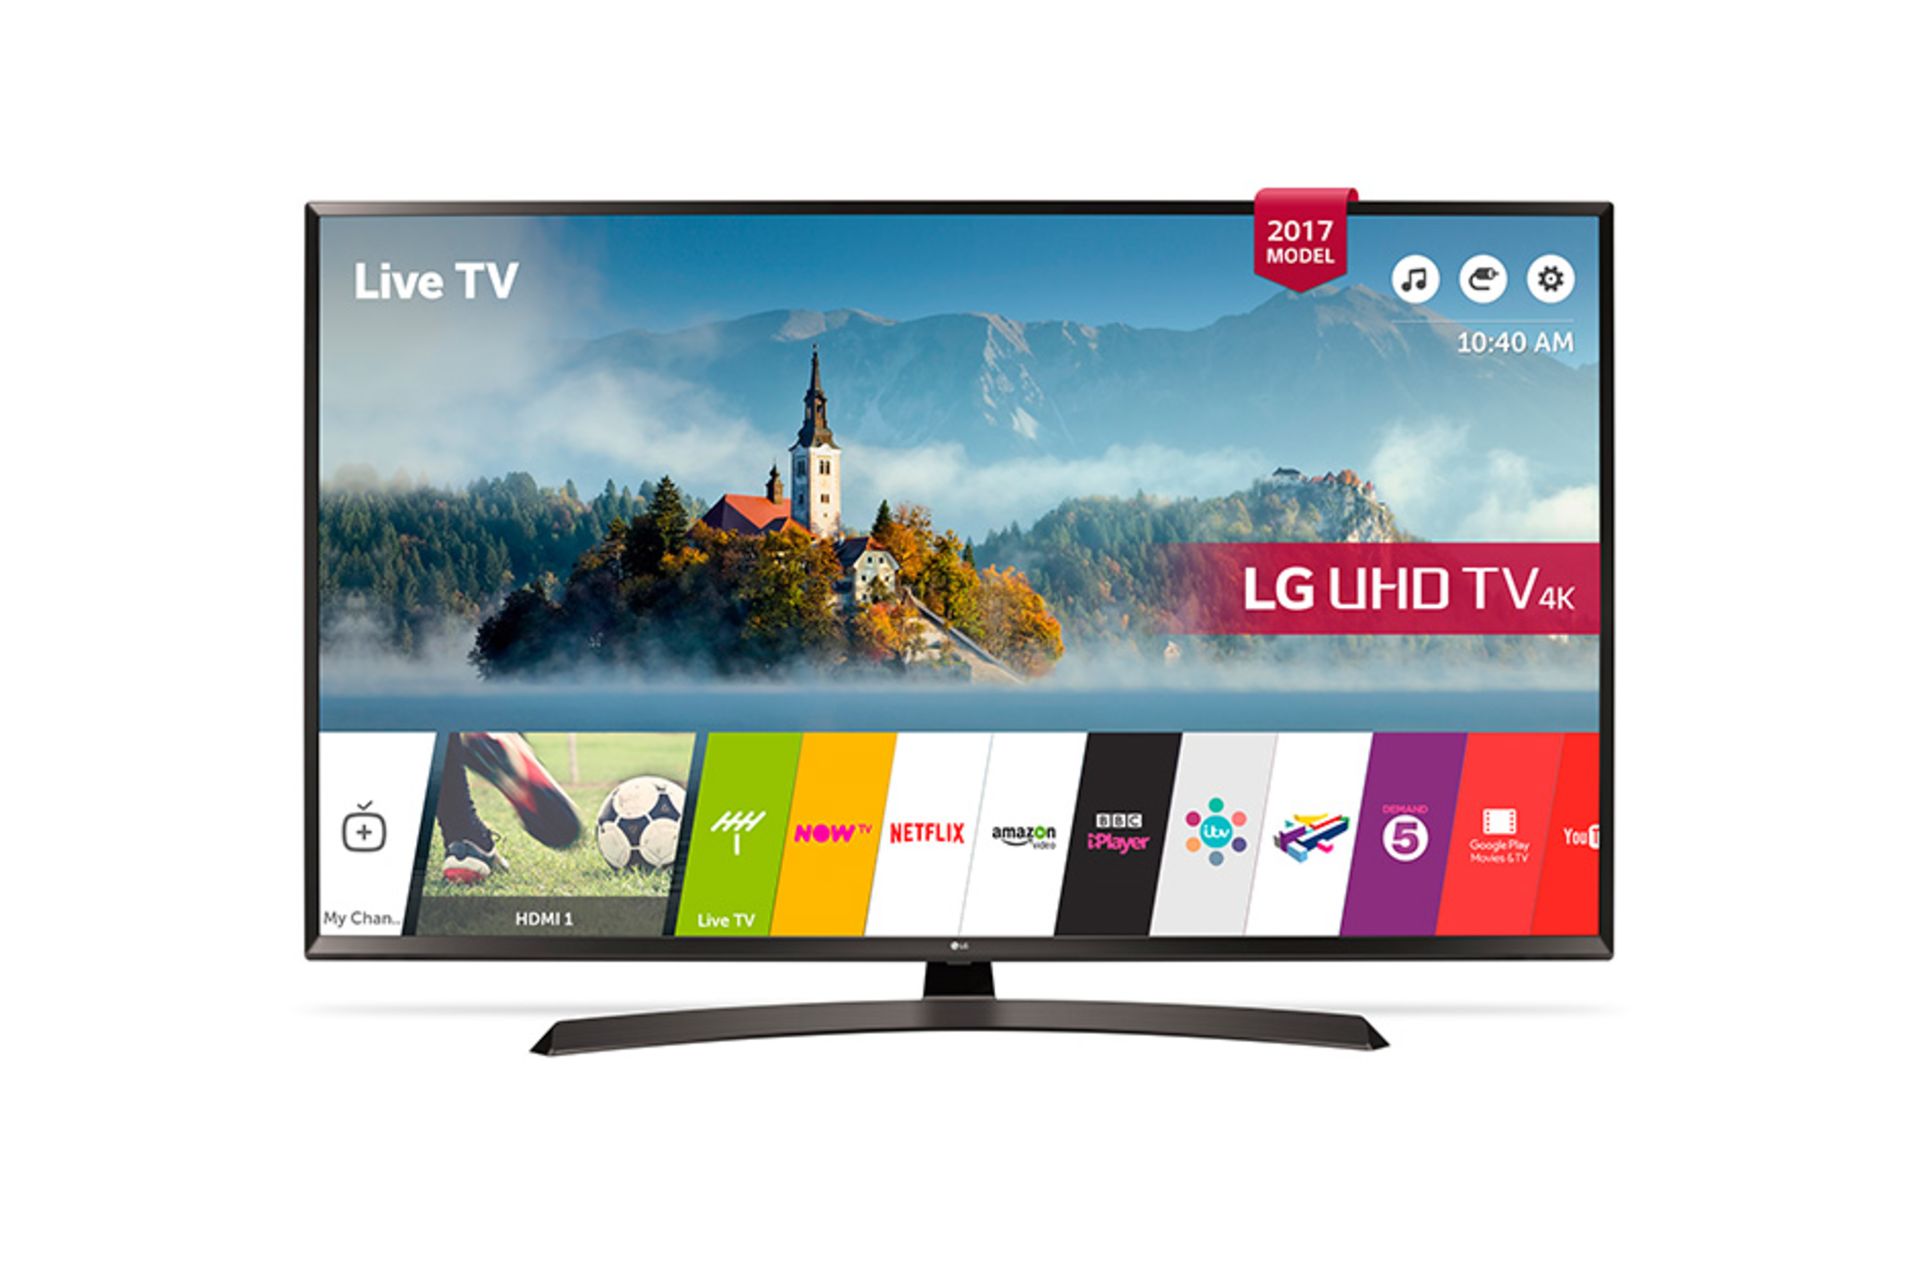 V Grade A LG 49 inch ACTIVE HDR 4K ULTRA HD LED SMART TV WITH FREEVIEW HD & WEBOS 3.5 & WIFI